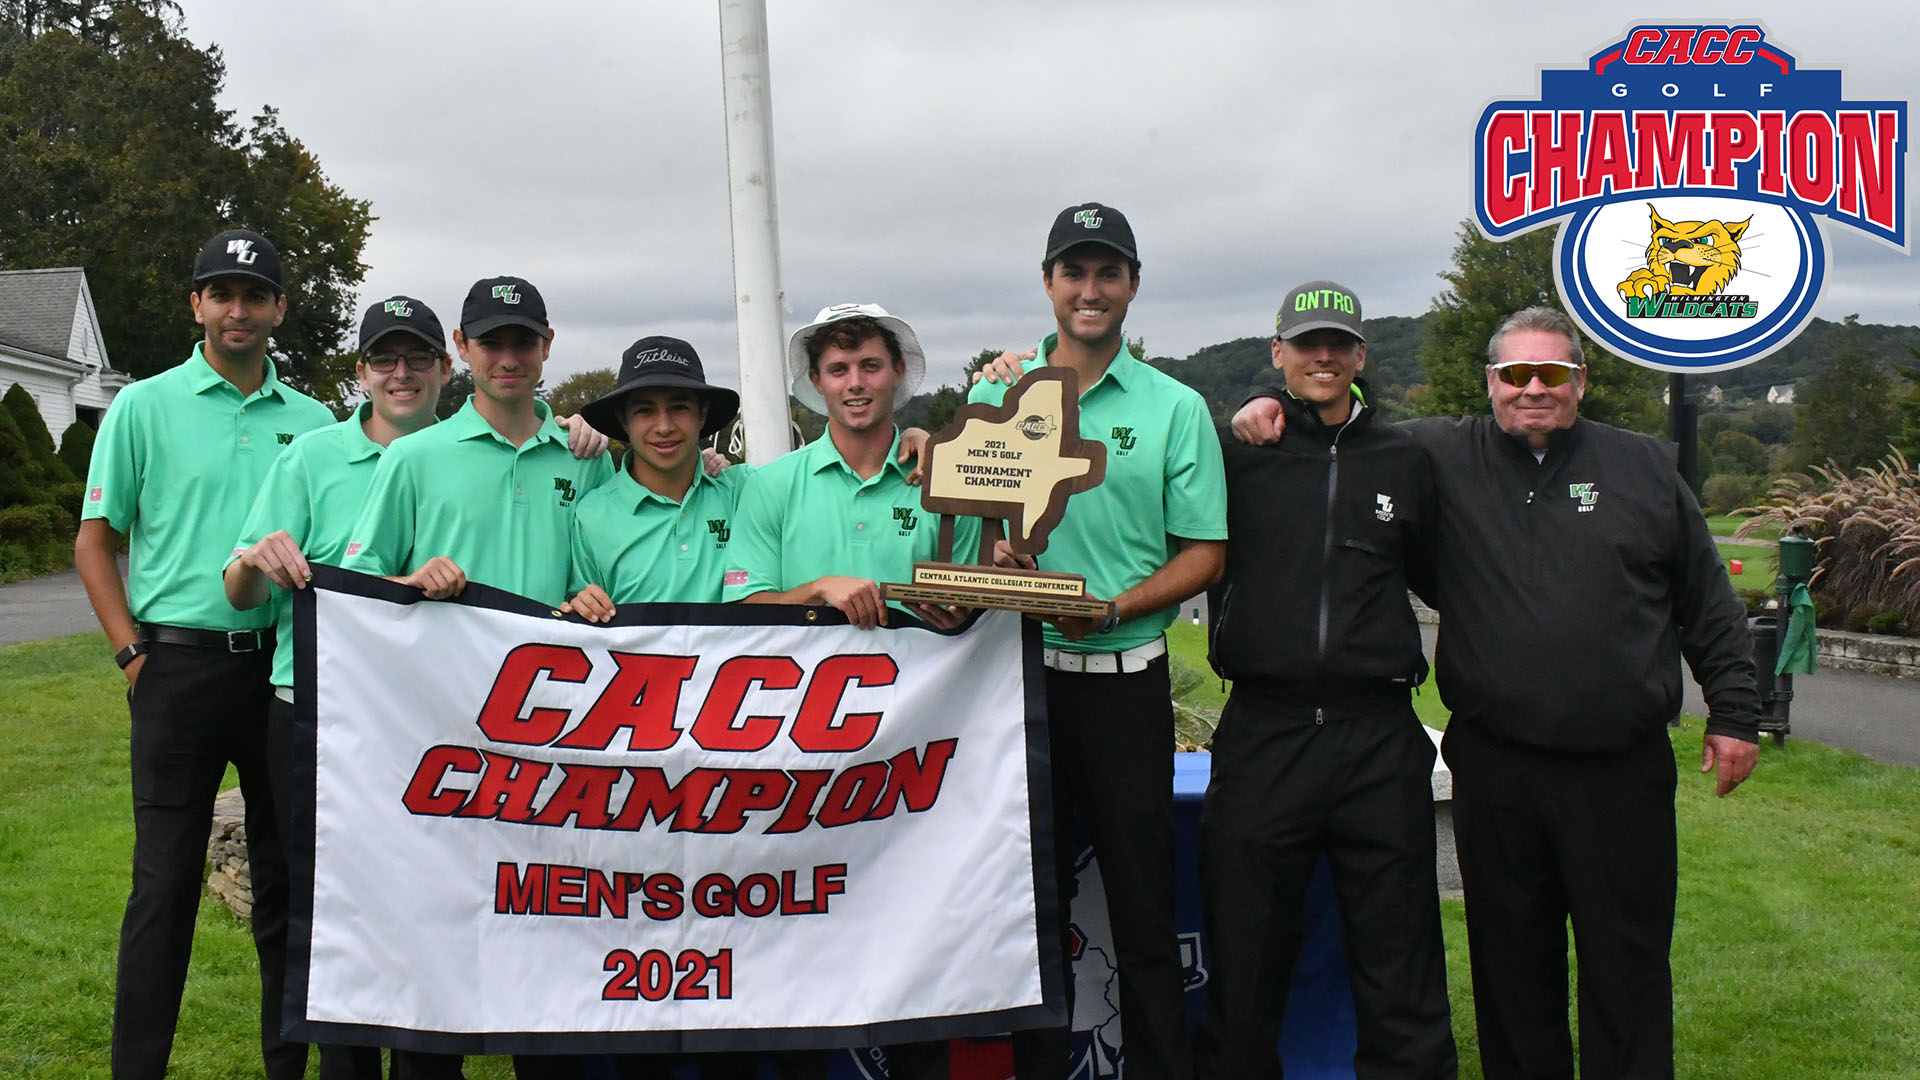 Five Birdies Over Final 2 Holes Propel WilmU to 2021 CACC Golf Championship